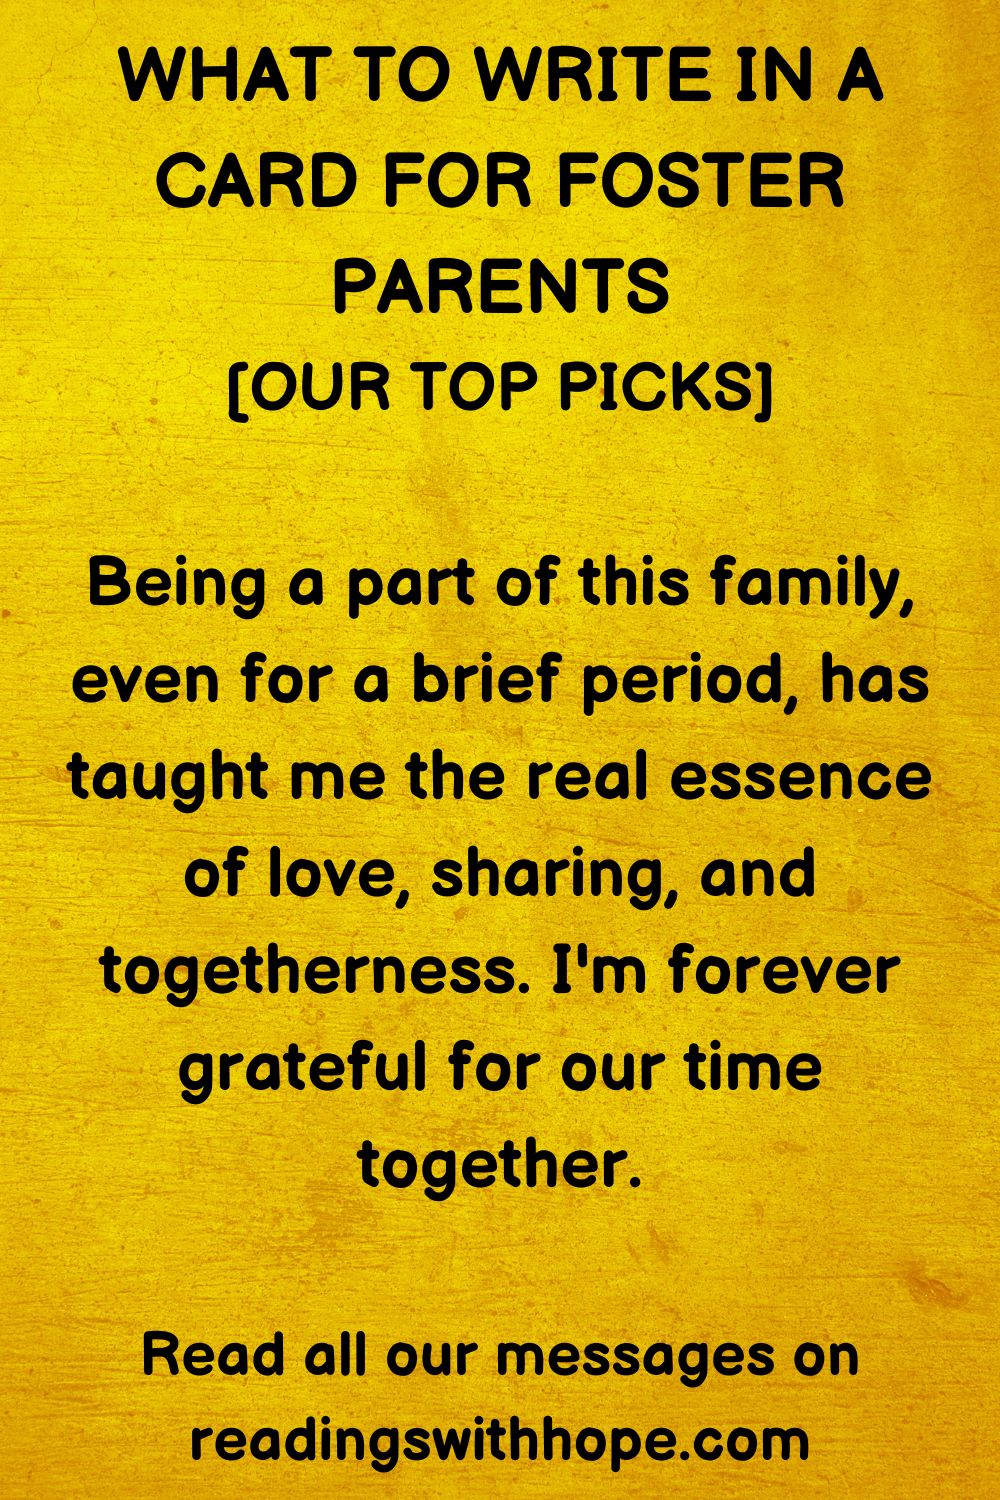 What to Write in a Card for Foster Parents